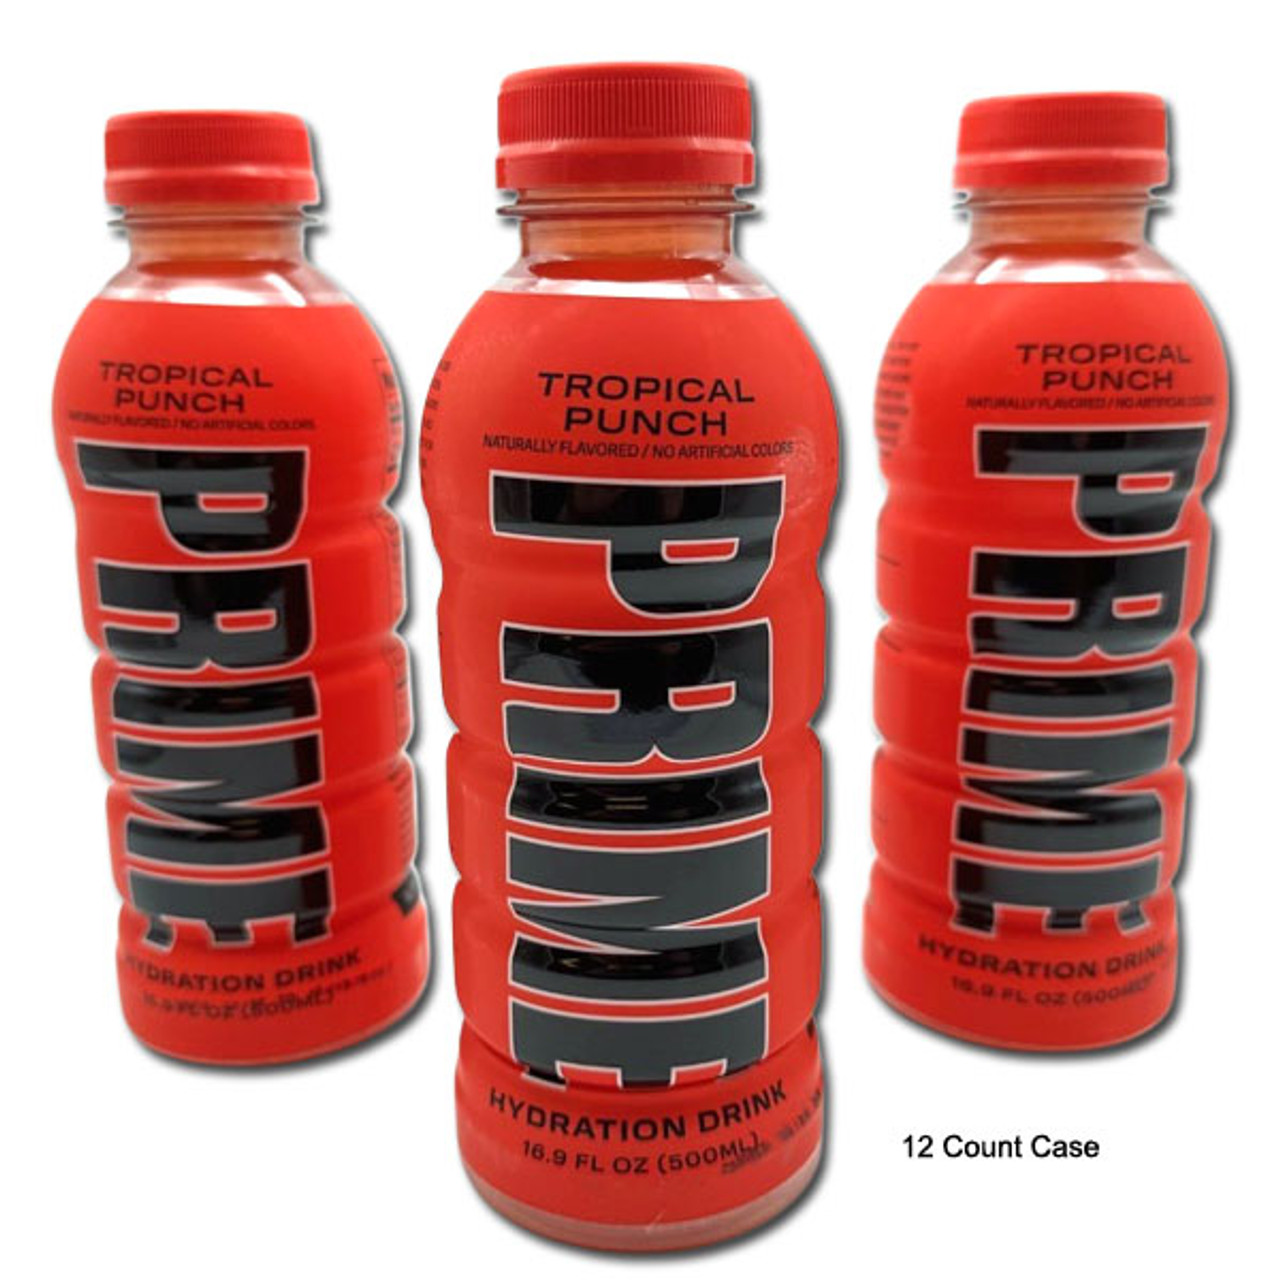 Prime Hydration Drink Tropical Punch - 16.9oz / 12ct